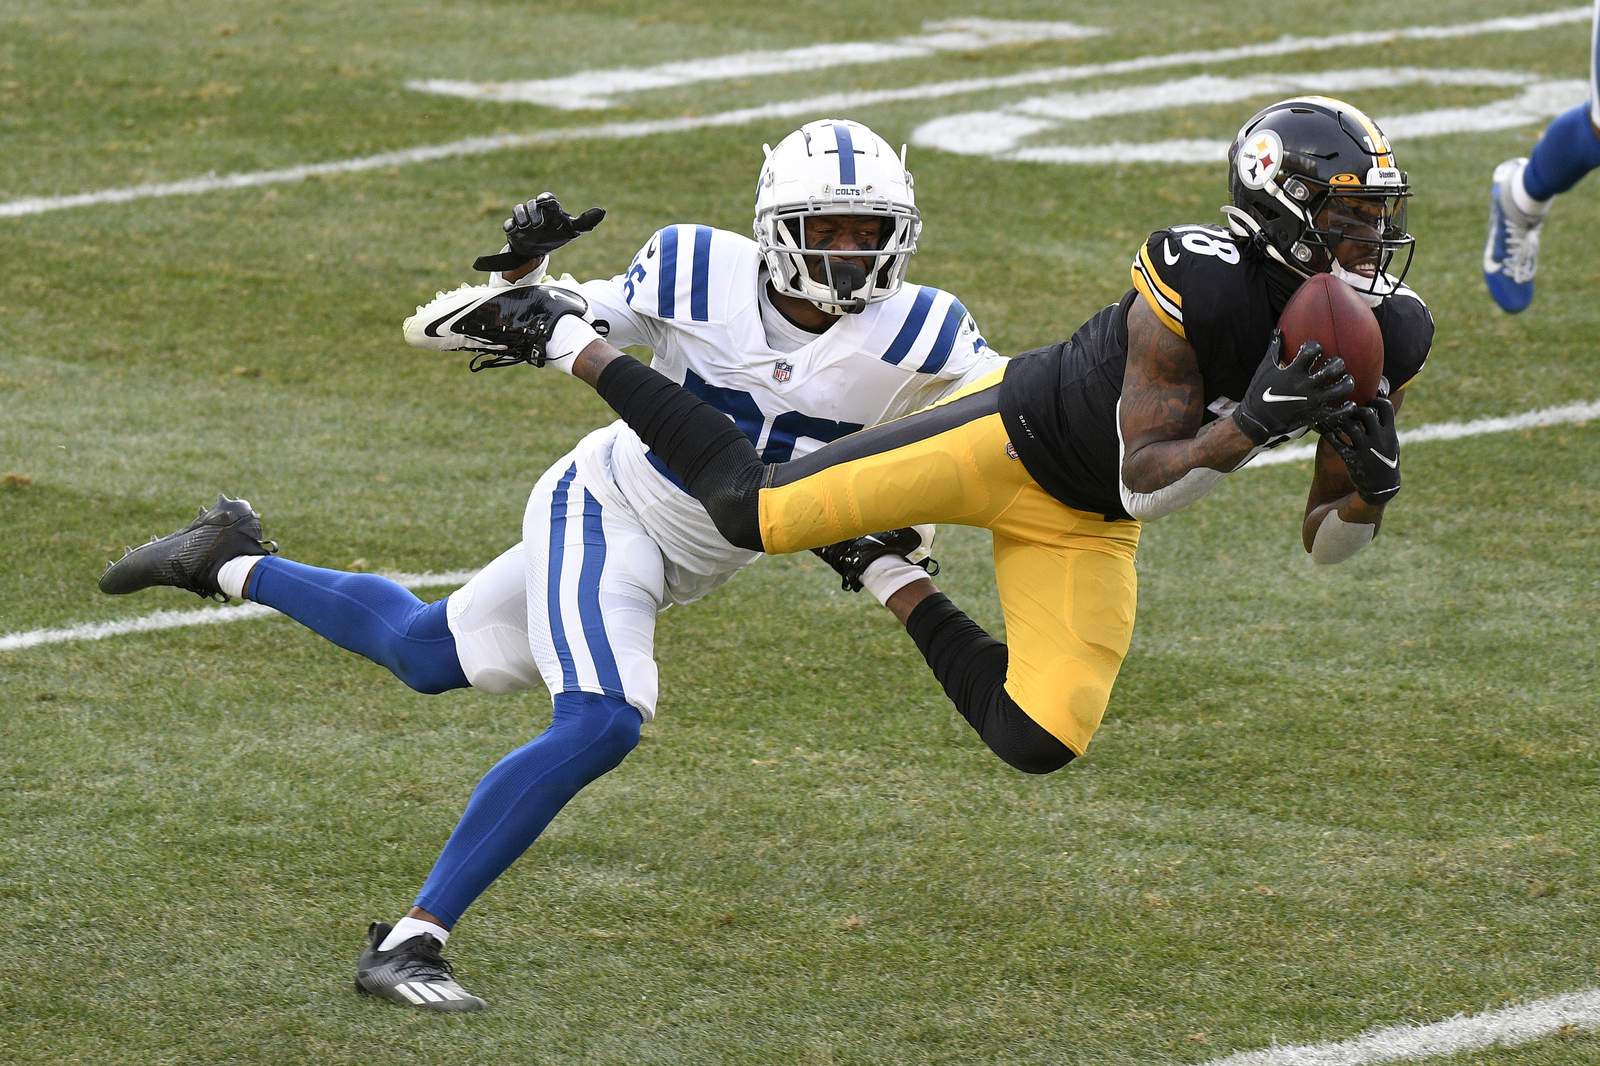 Pickett's patience, poise help fuel Steelers' late surge